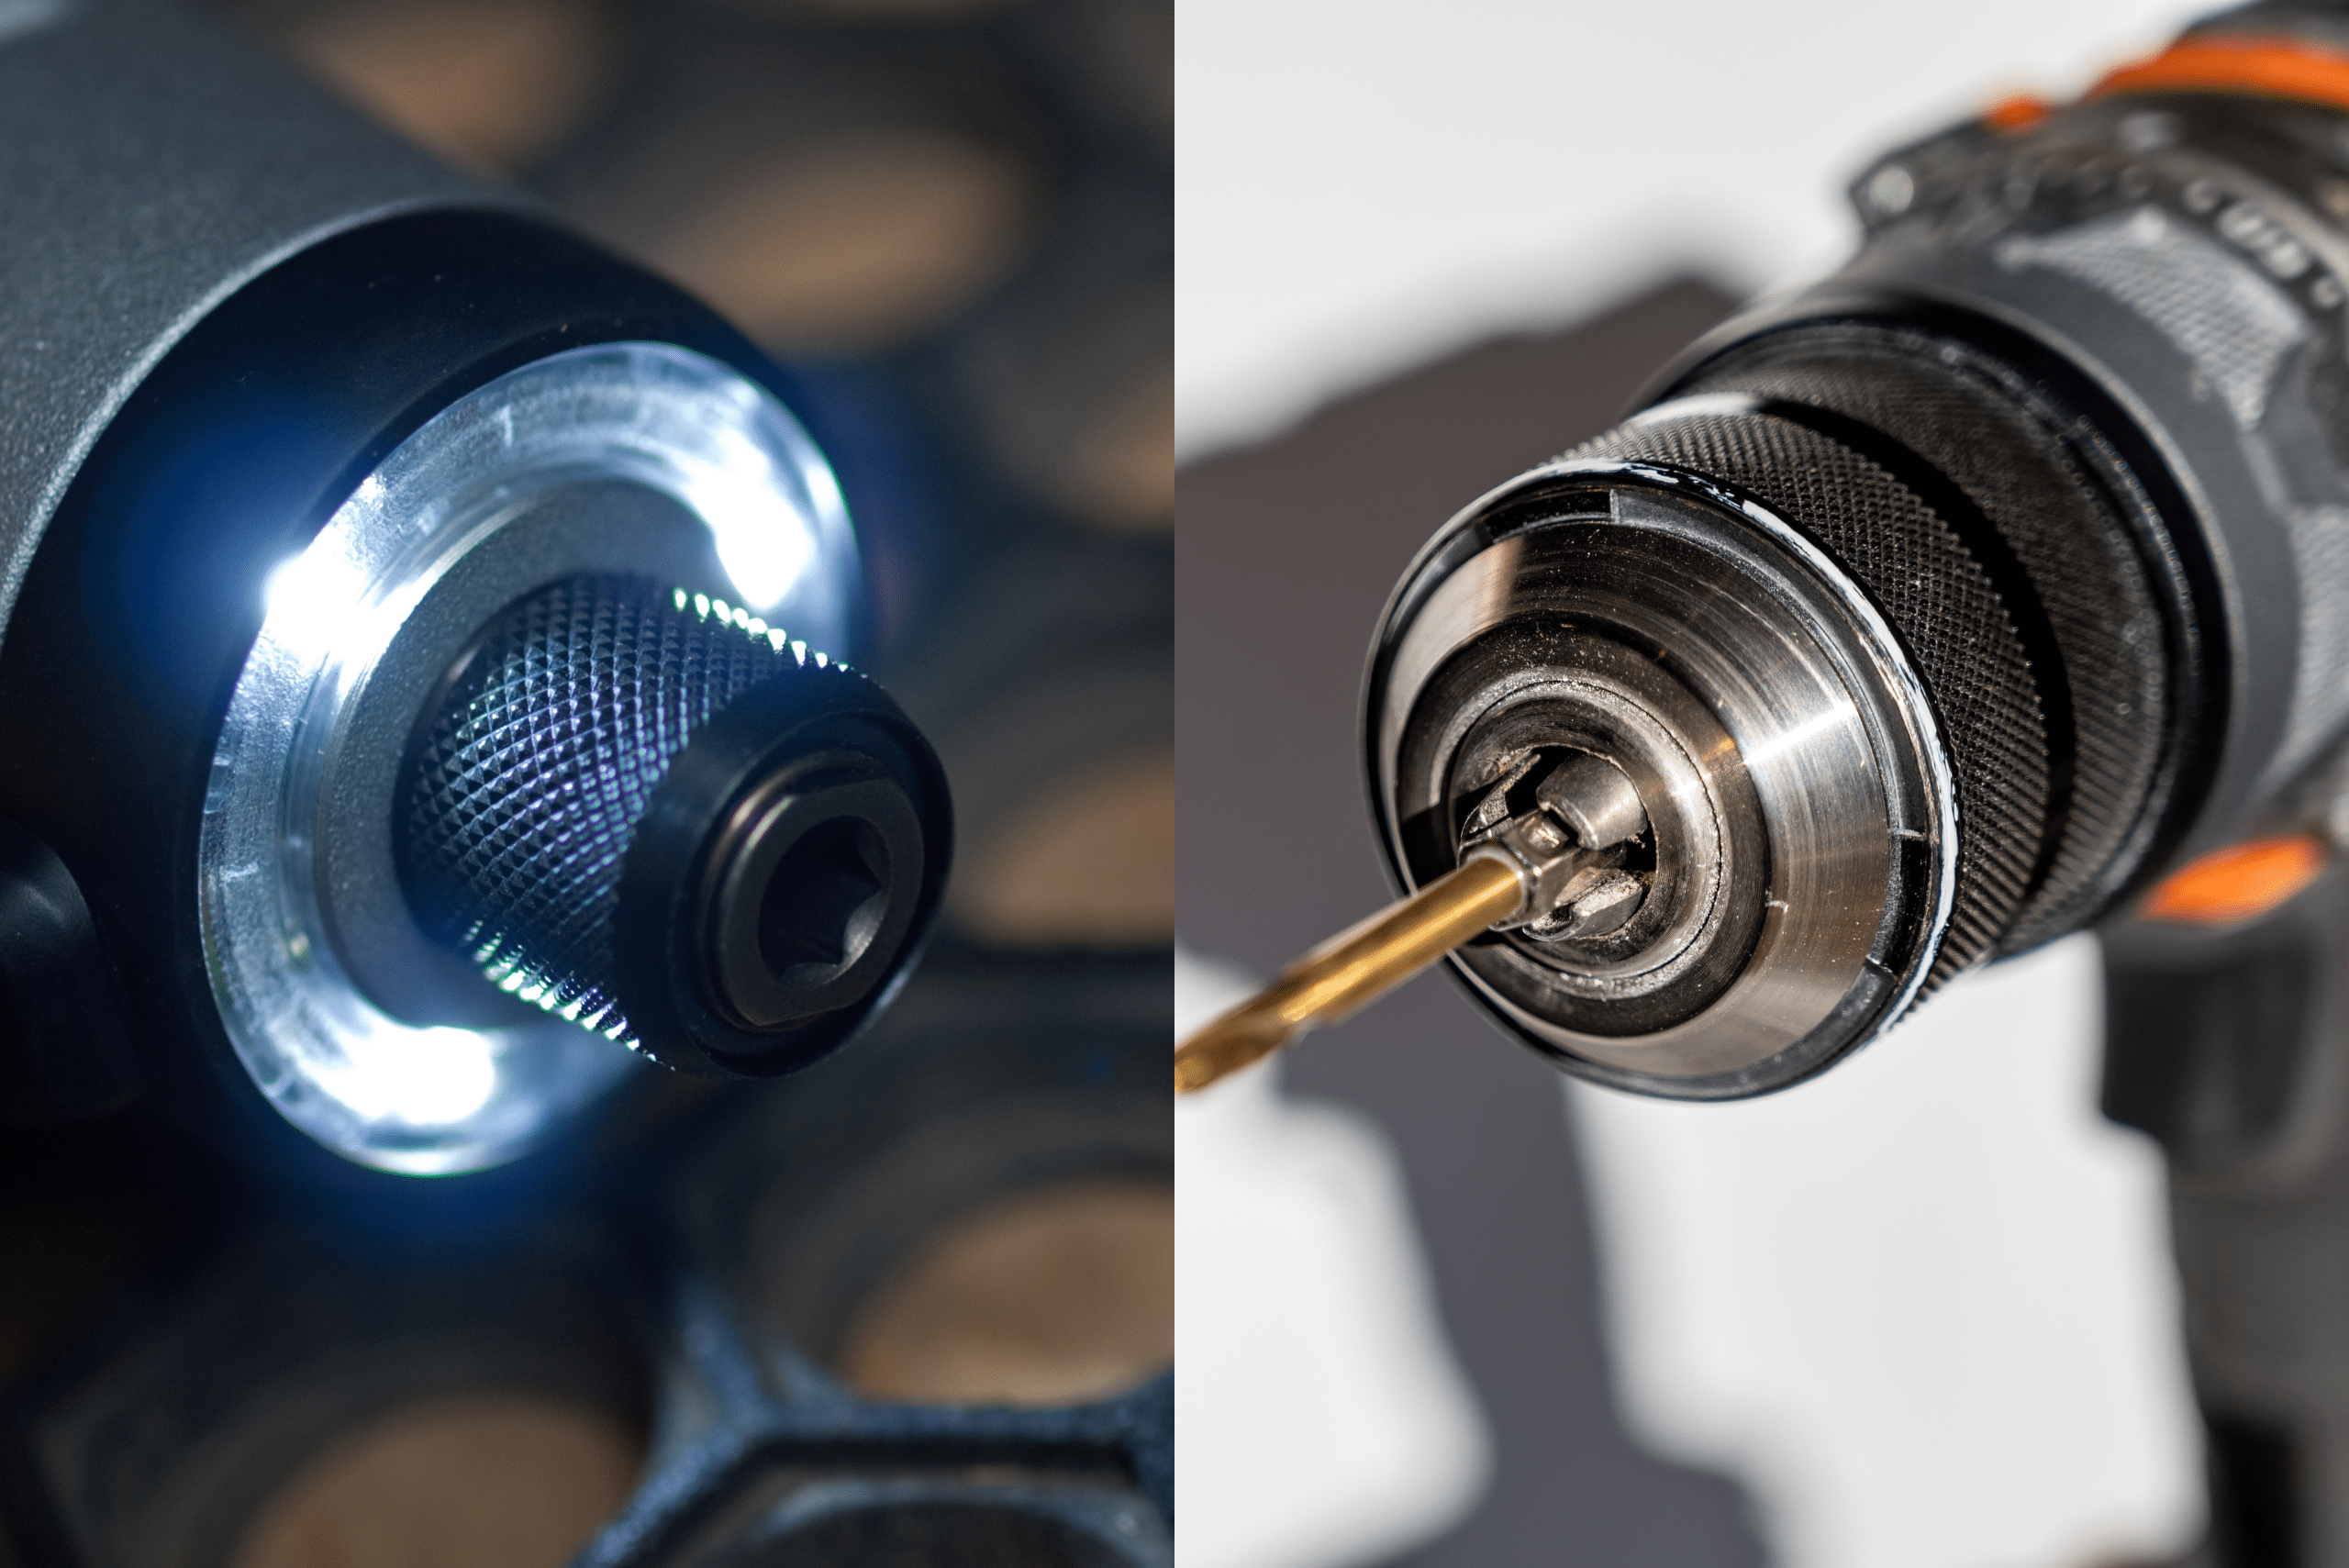 Closeup of impact driver on the left and a closeup of a drill on the right.